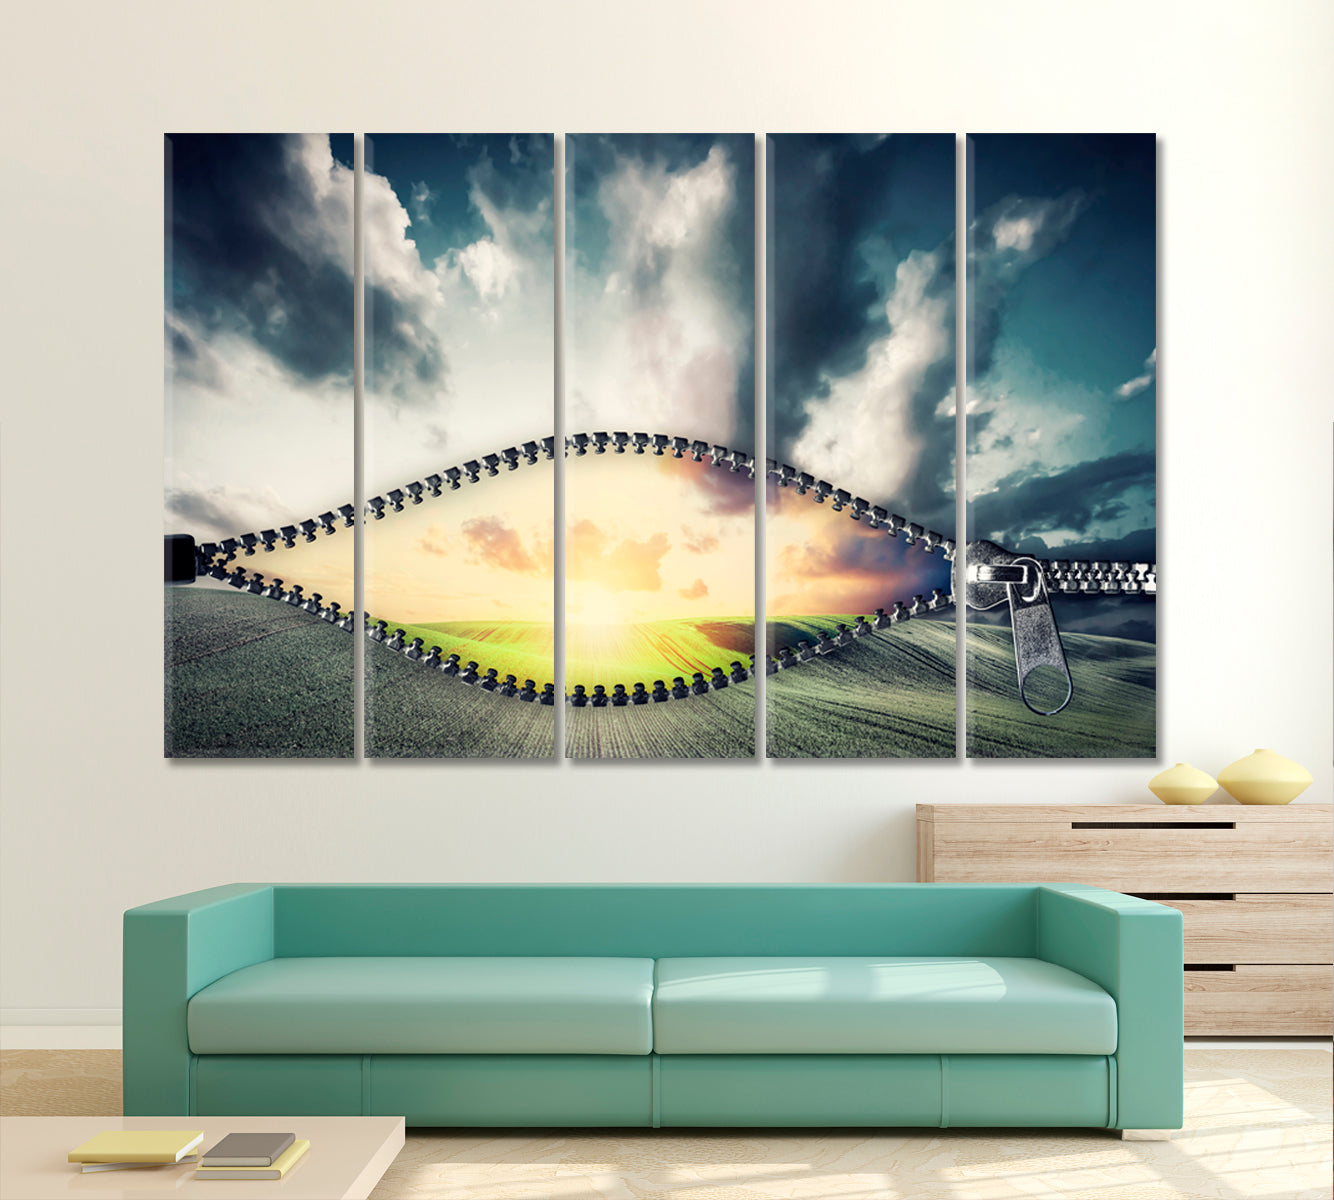 Unzip a View for Better World Skyscape Canvas Artesty 5 panels 36" x 24" 